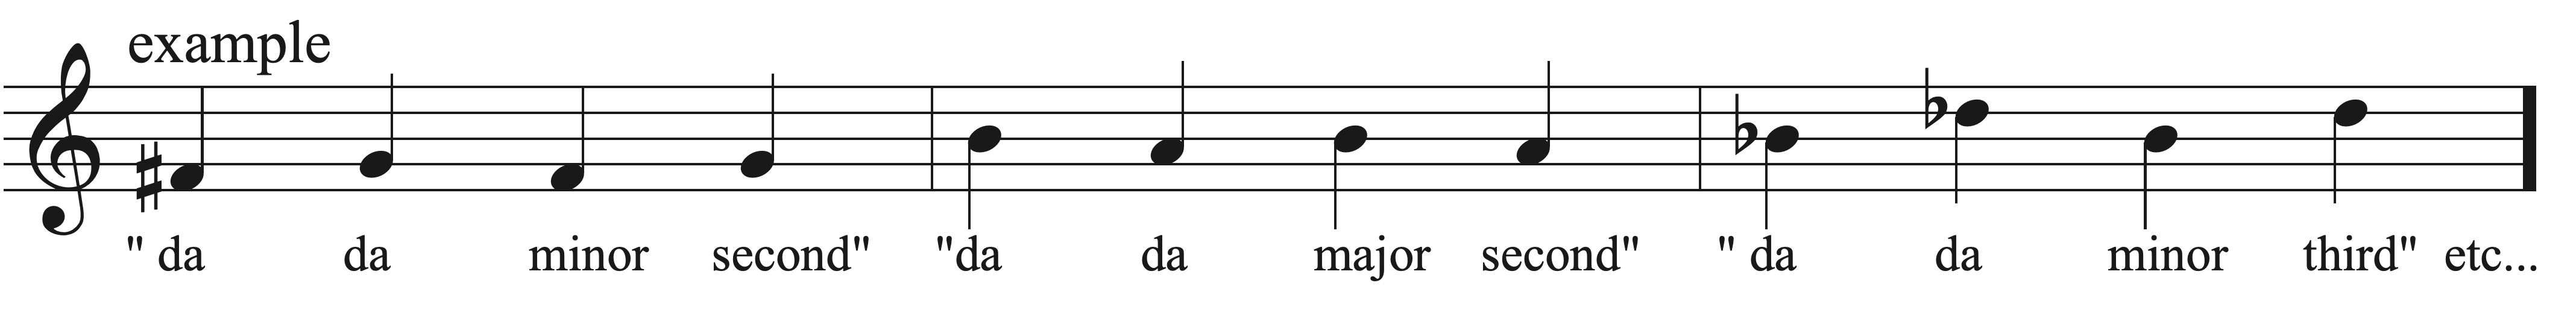 Intervals Sight Singing exercise example